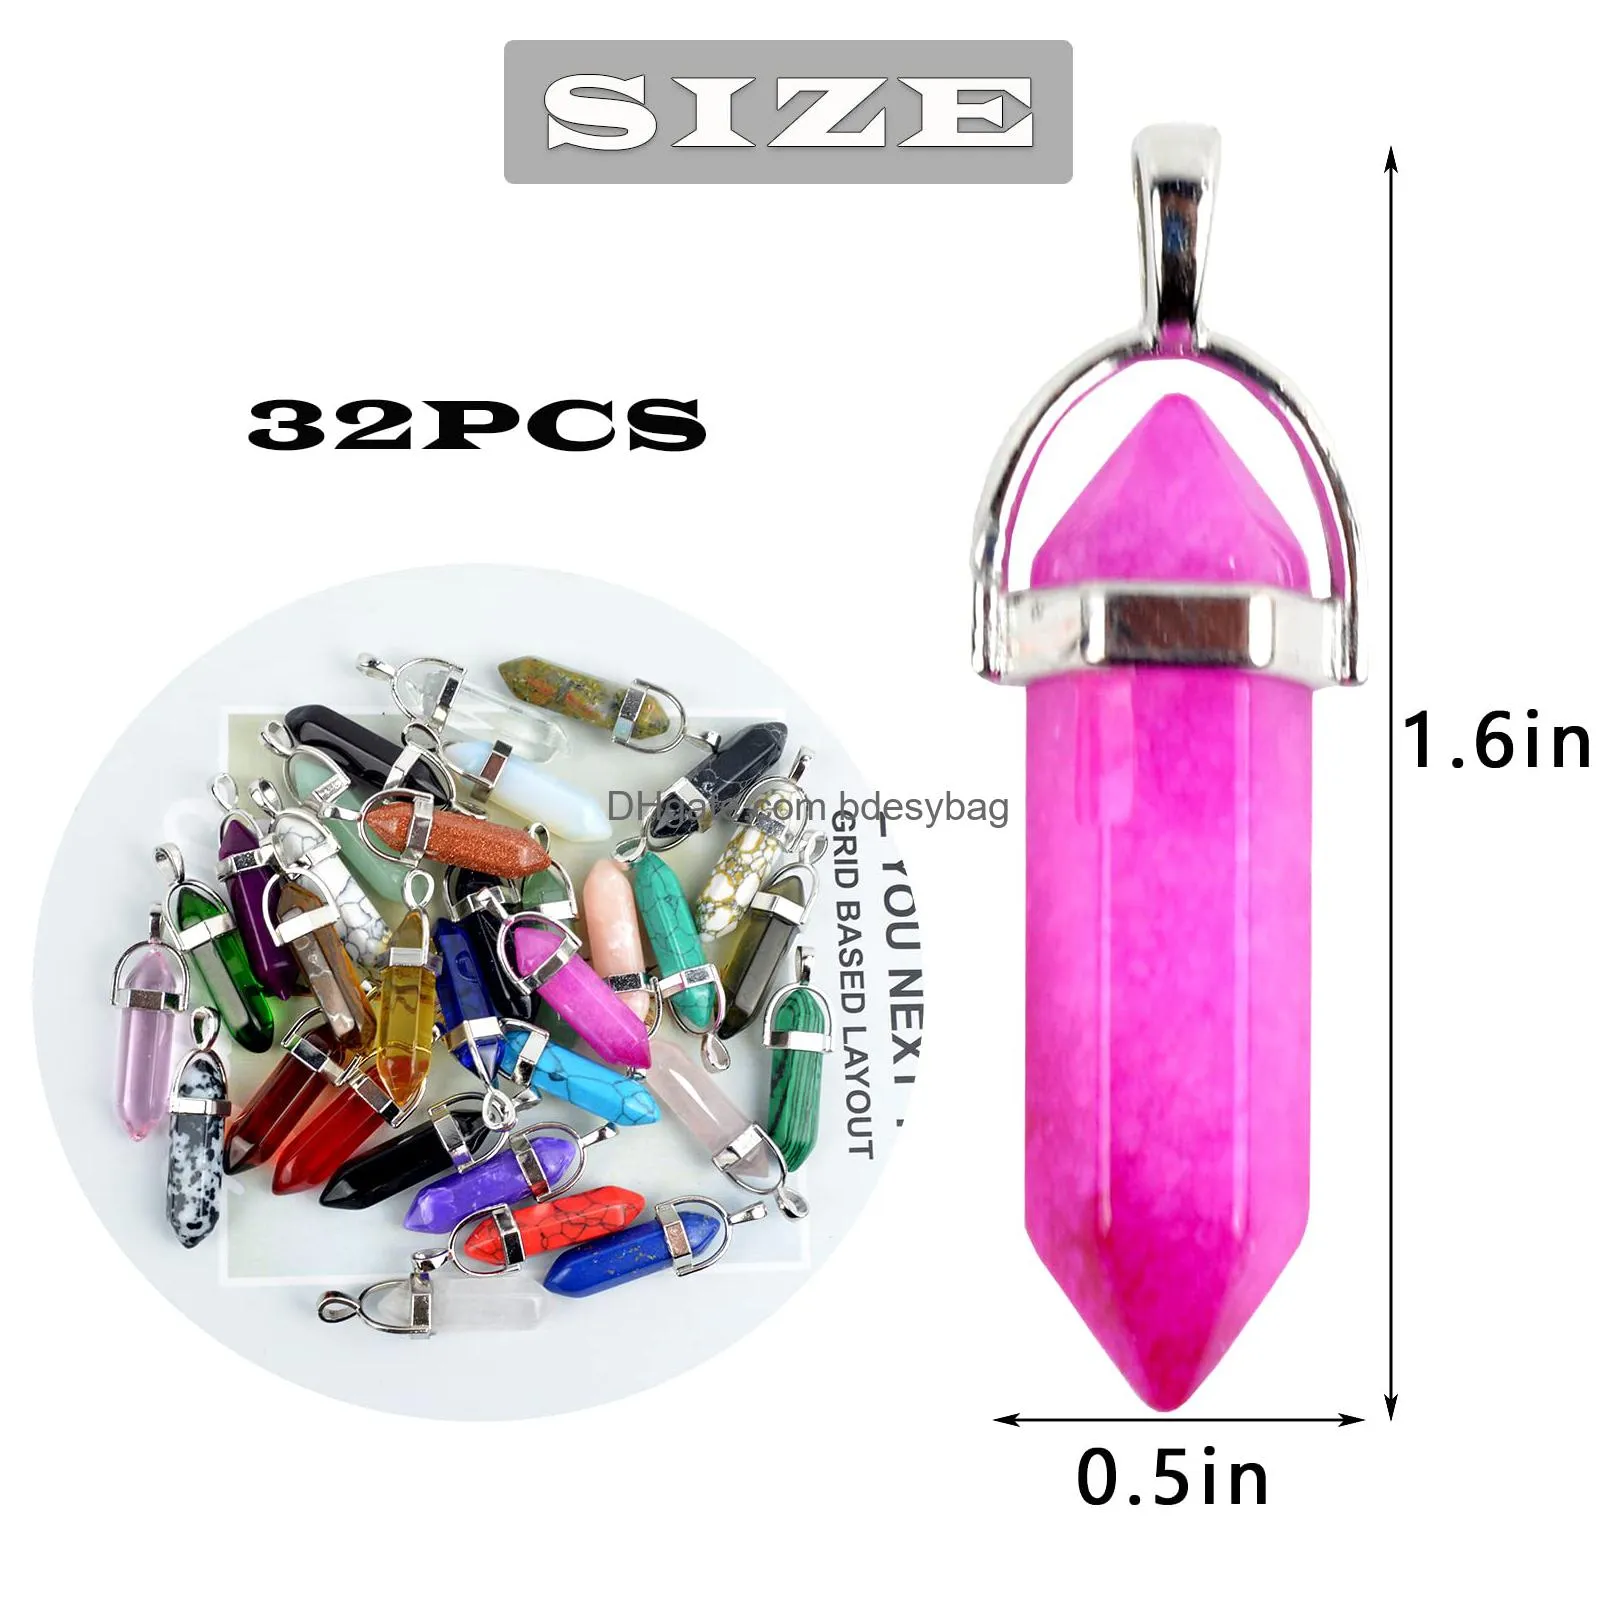 bullet shape gemstone pendant hexagonal crystal pointed quartz pendants artificial stone for chakra healing diy necklace jewelry making with storage bag